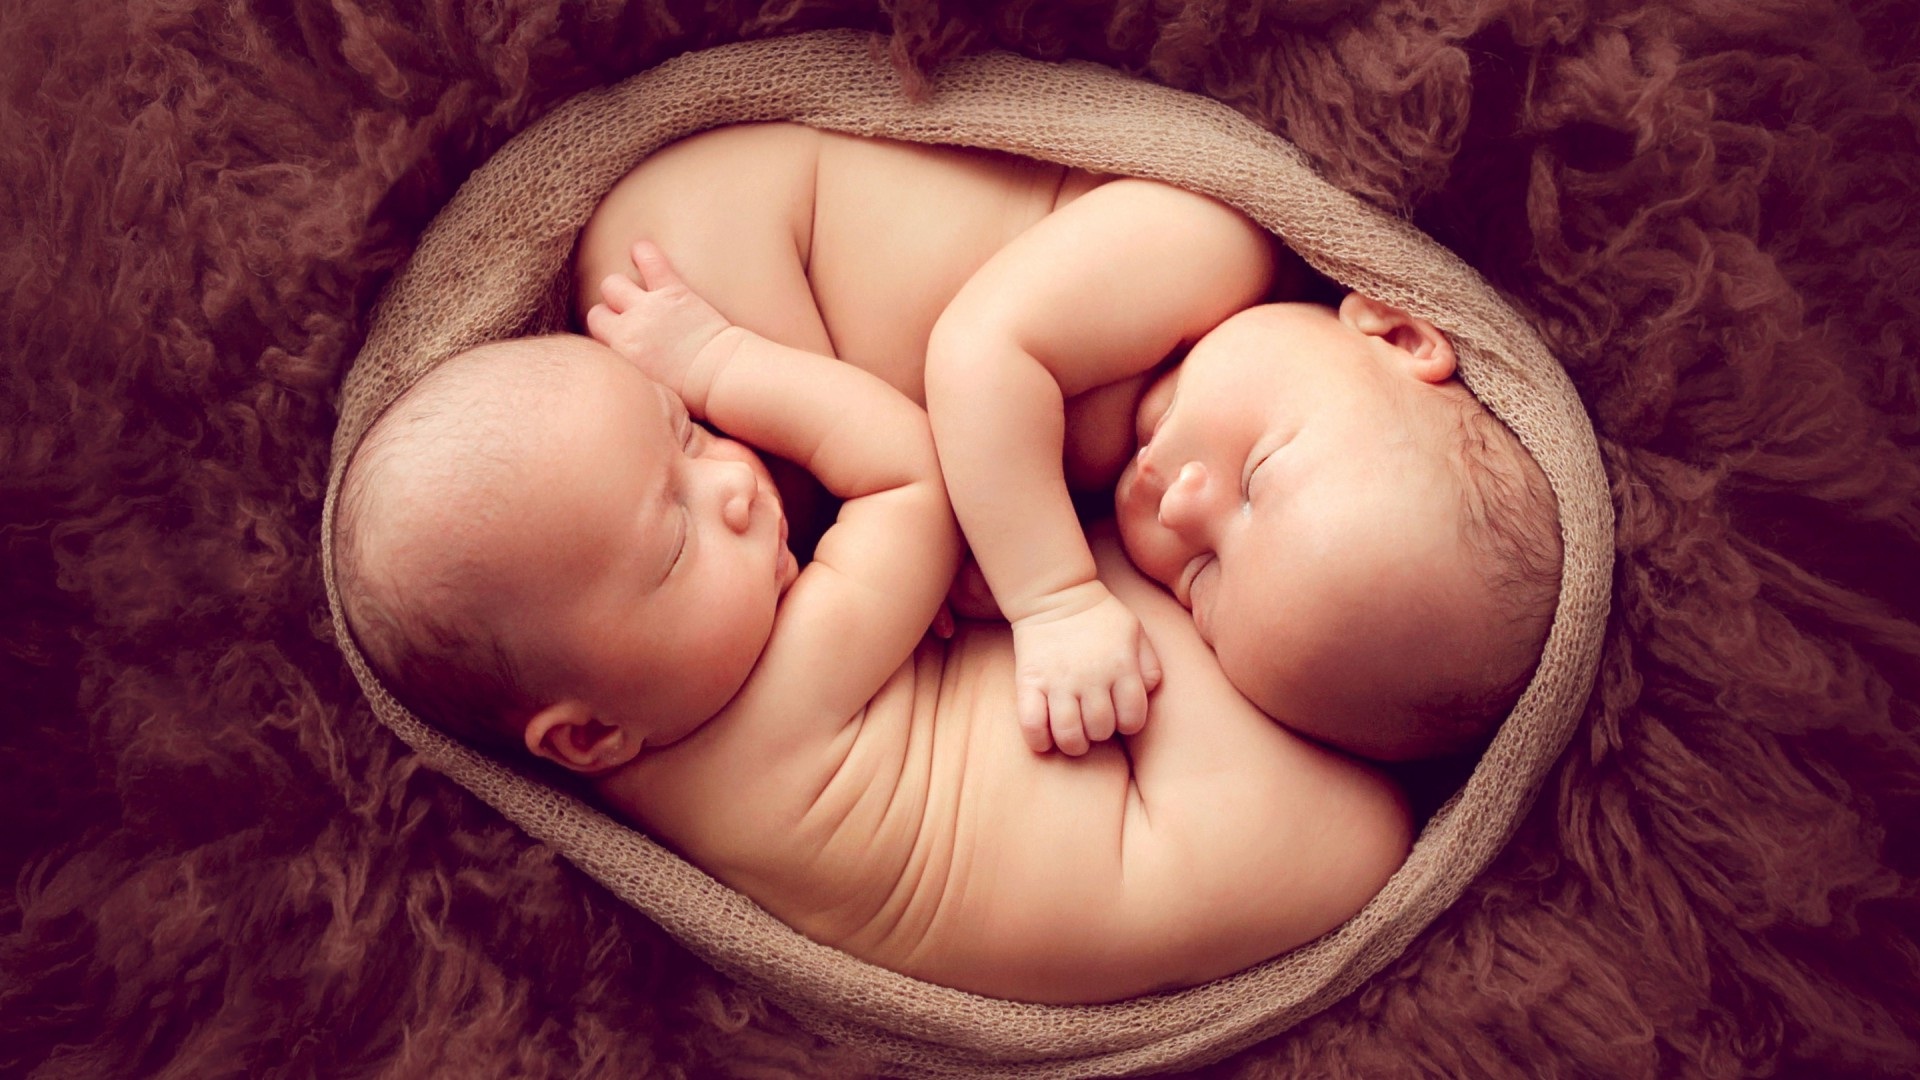 Good Night Couple Of Baby Sleeping Wallpapers Cute Baby Pic Twins Hd Wallpaper Backgrounds Download